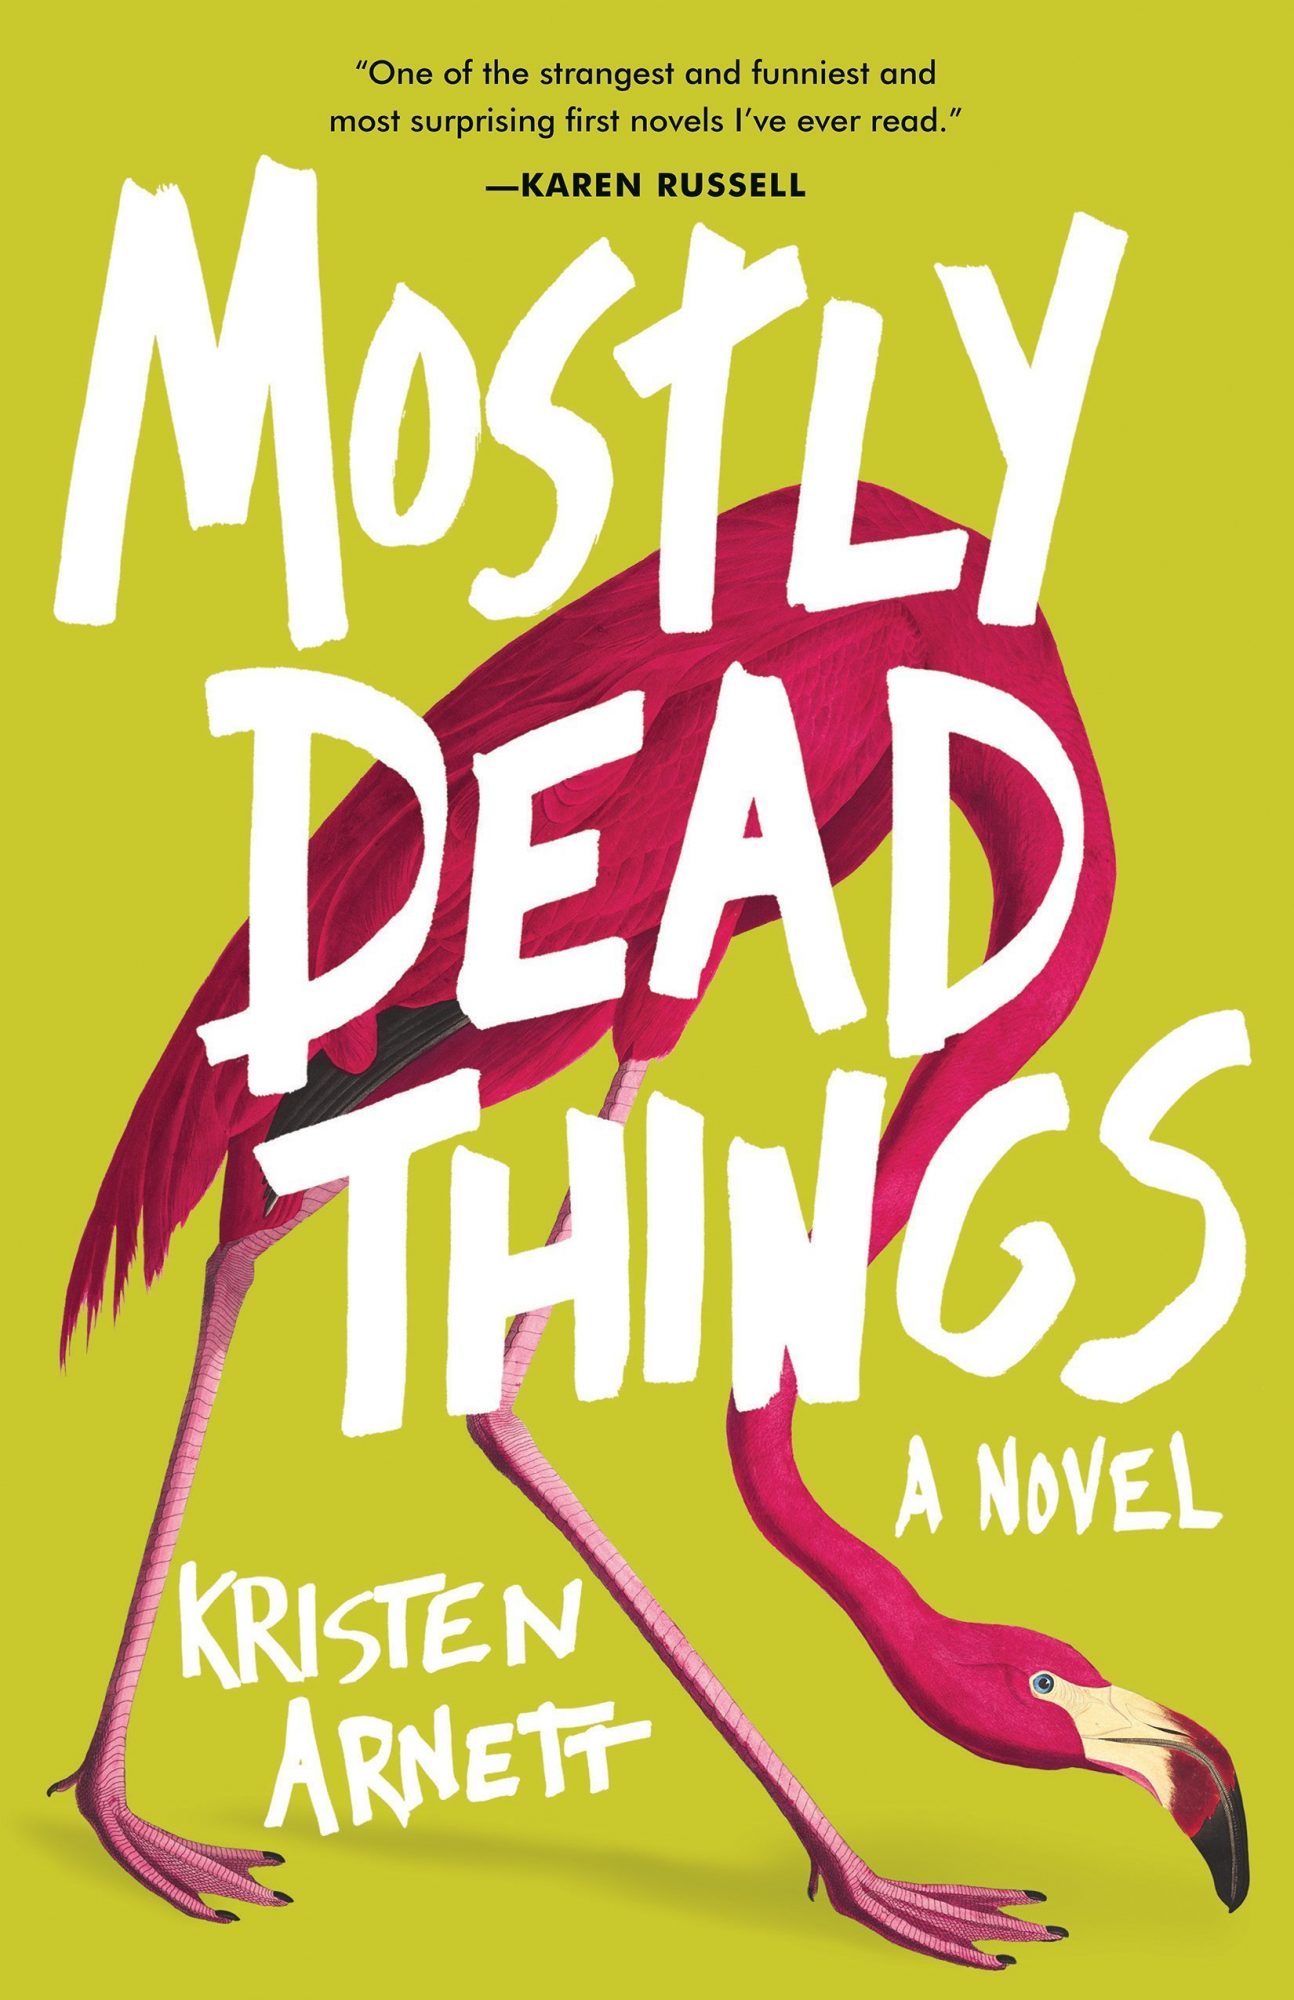 Mostly Dead Things book cover